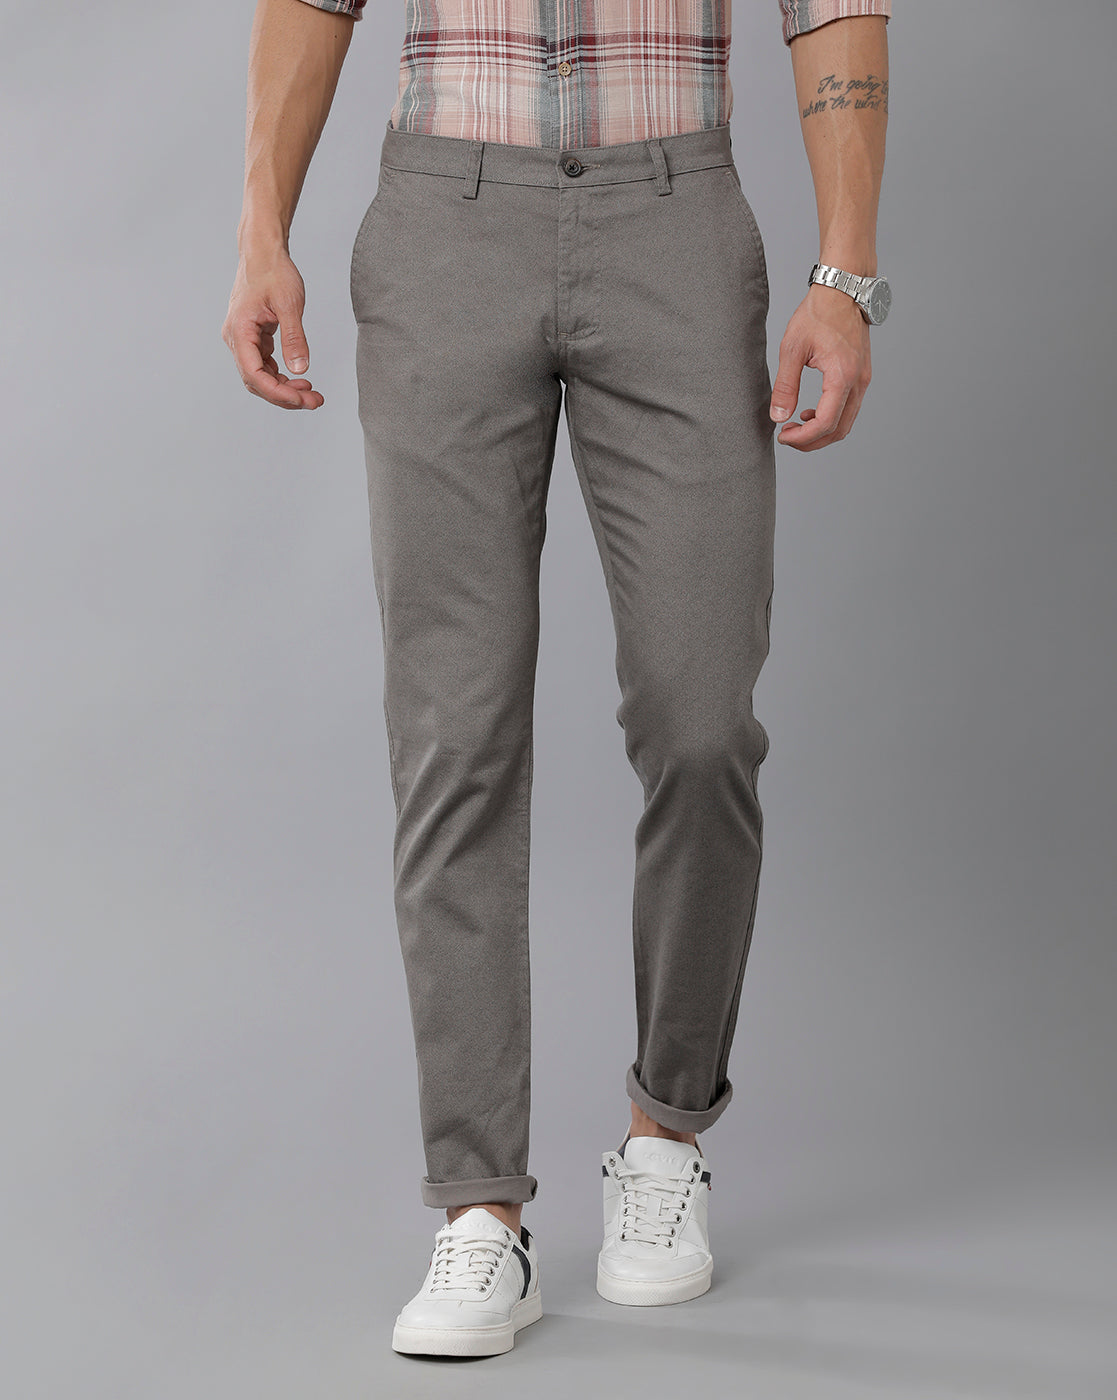 Buy Classic Polo Mens Cotton Solid Slim Fit Grey Color Trouser online